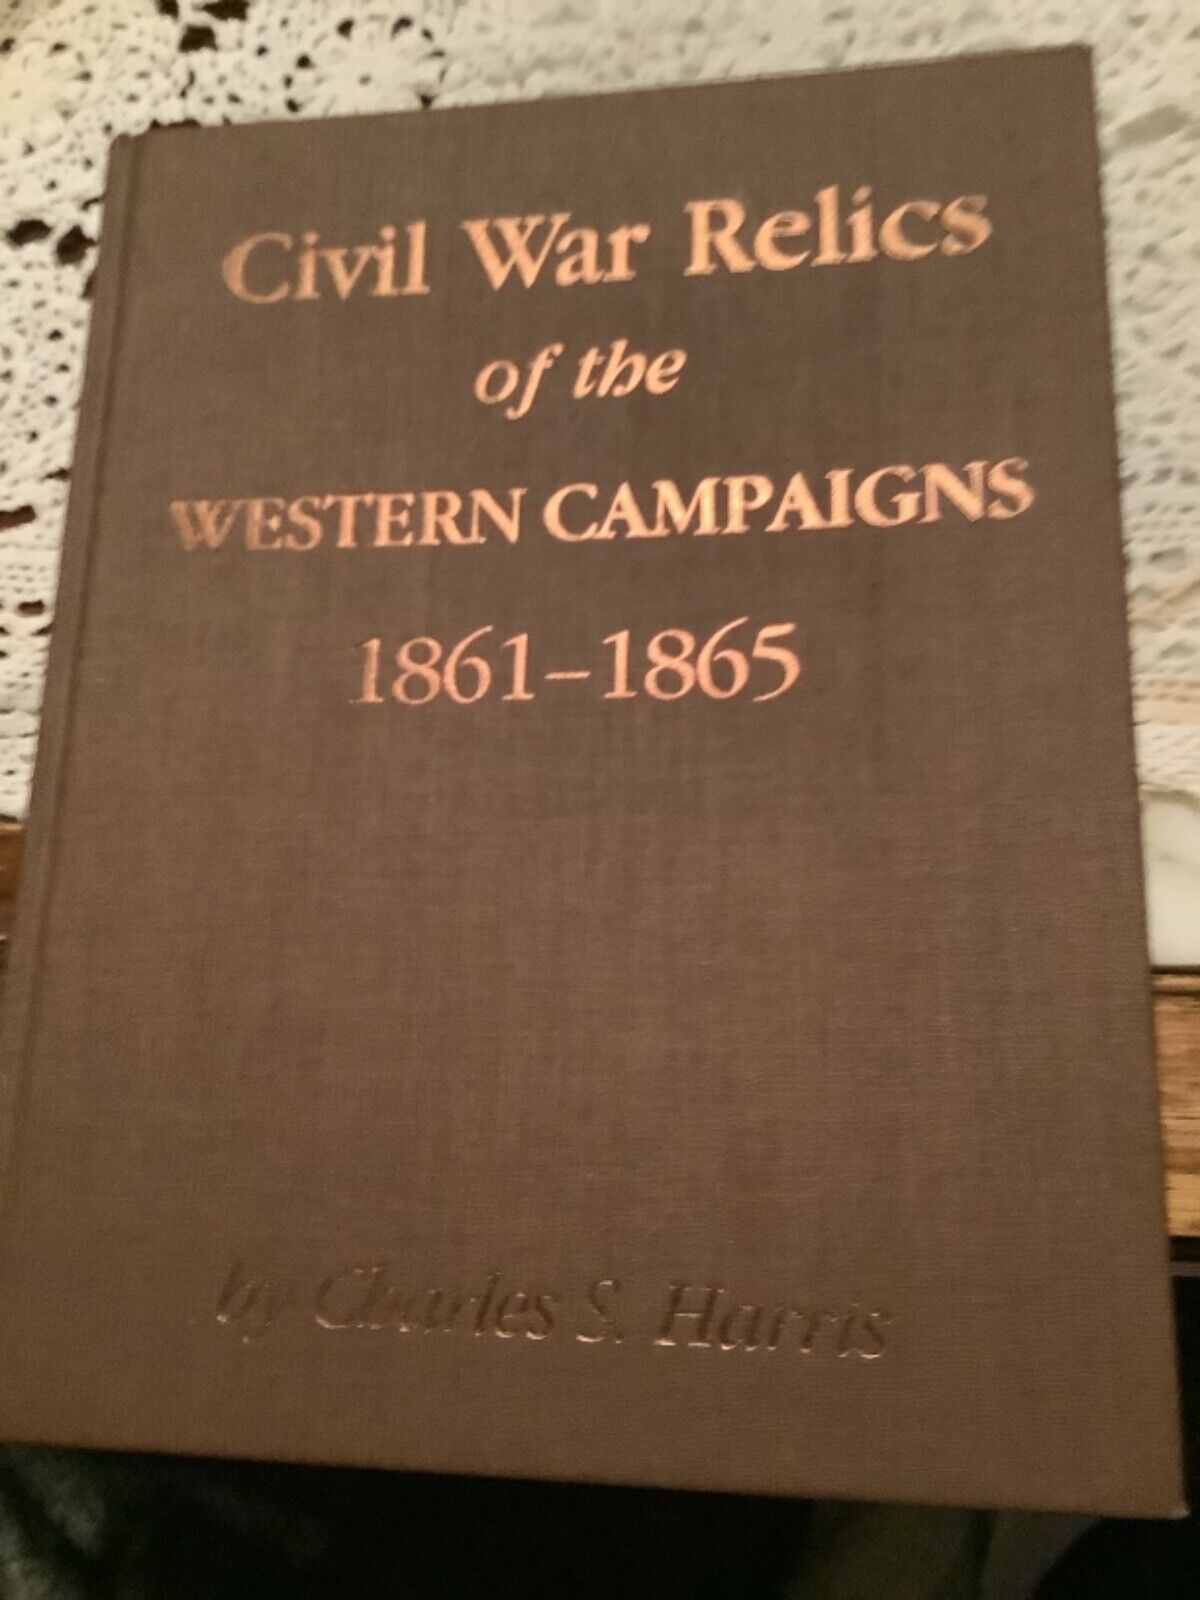 Civil War Relics of the Western Campaigns 1861-1865, Charles S Harris, 2nd Print